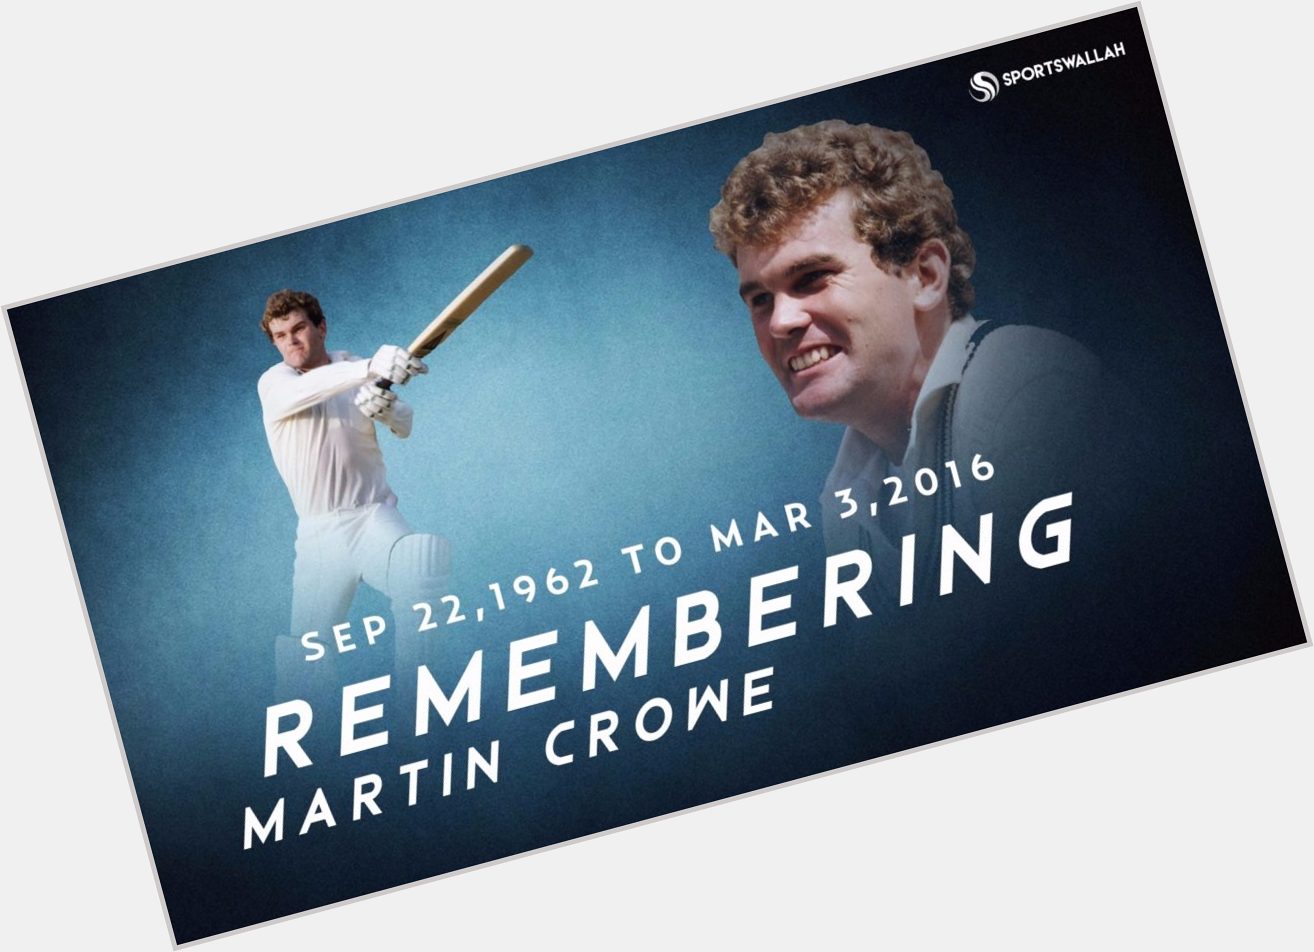 Happy Birthday, Martin Crowe.
The legend of sport who still lives in the hearts and memories. 